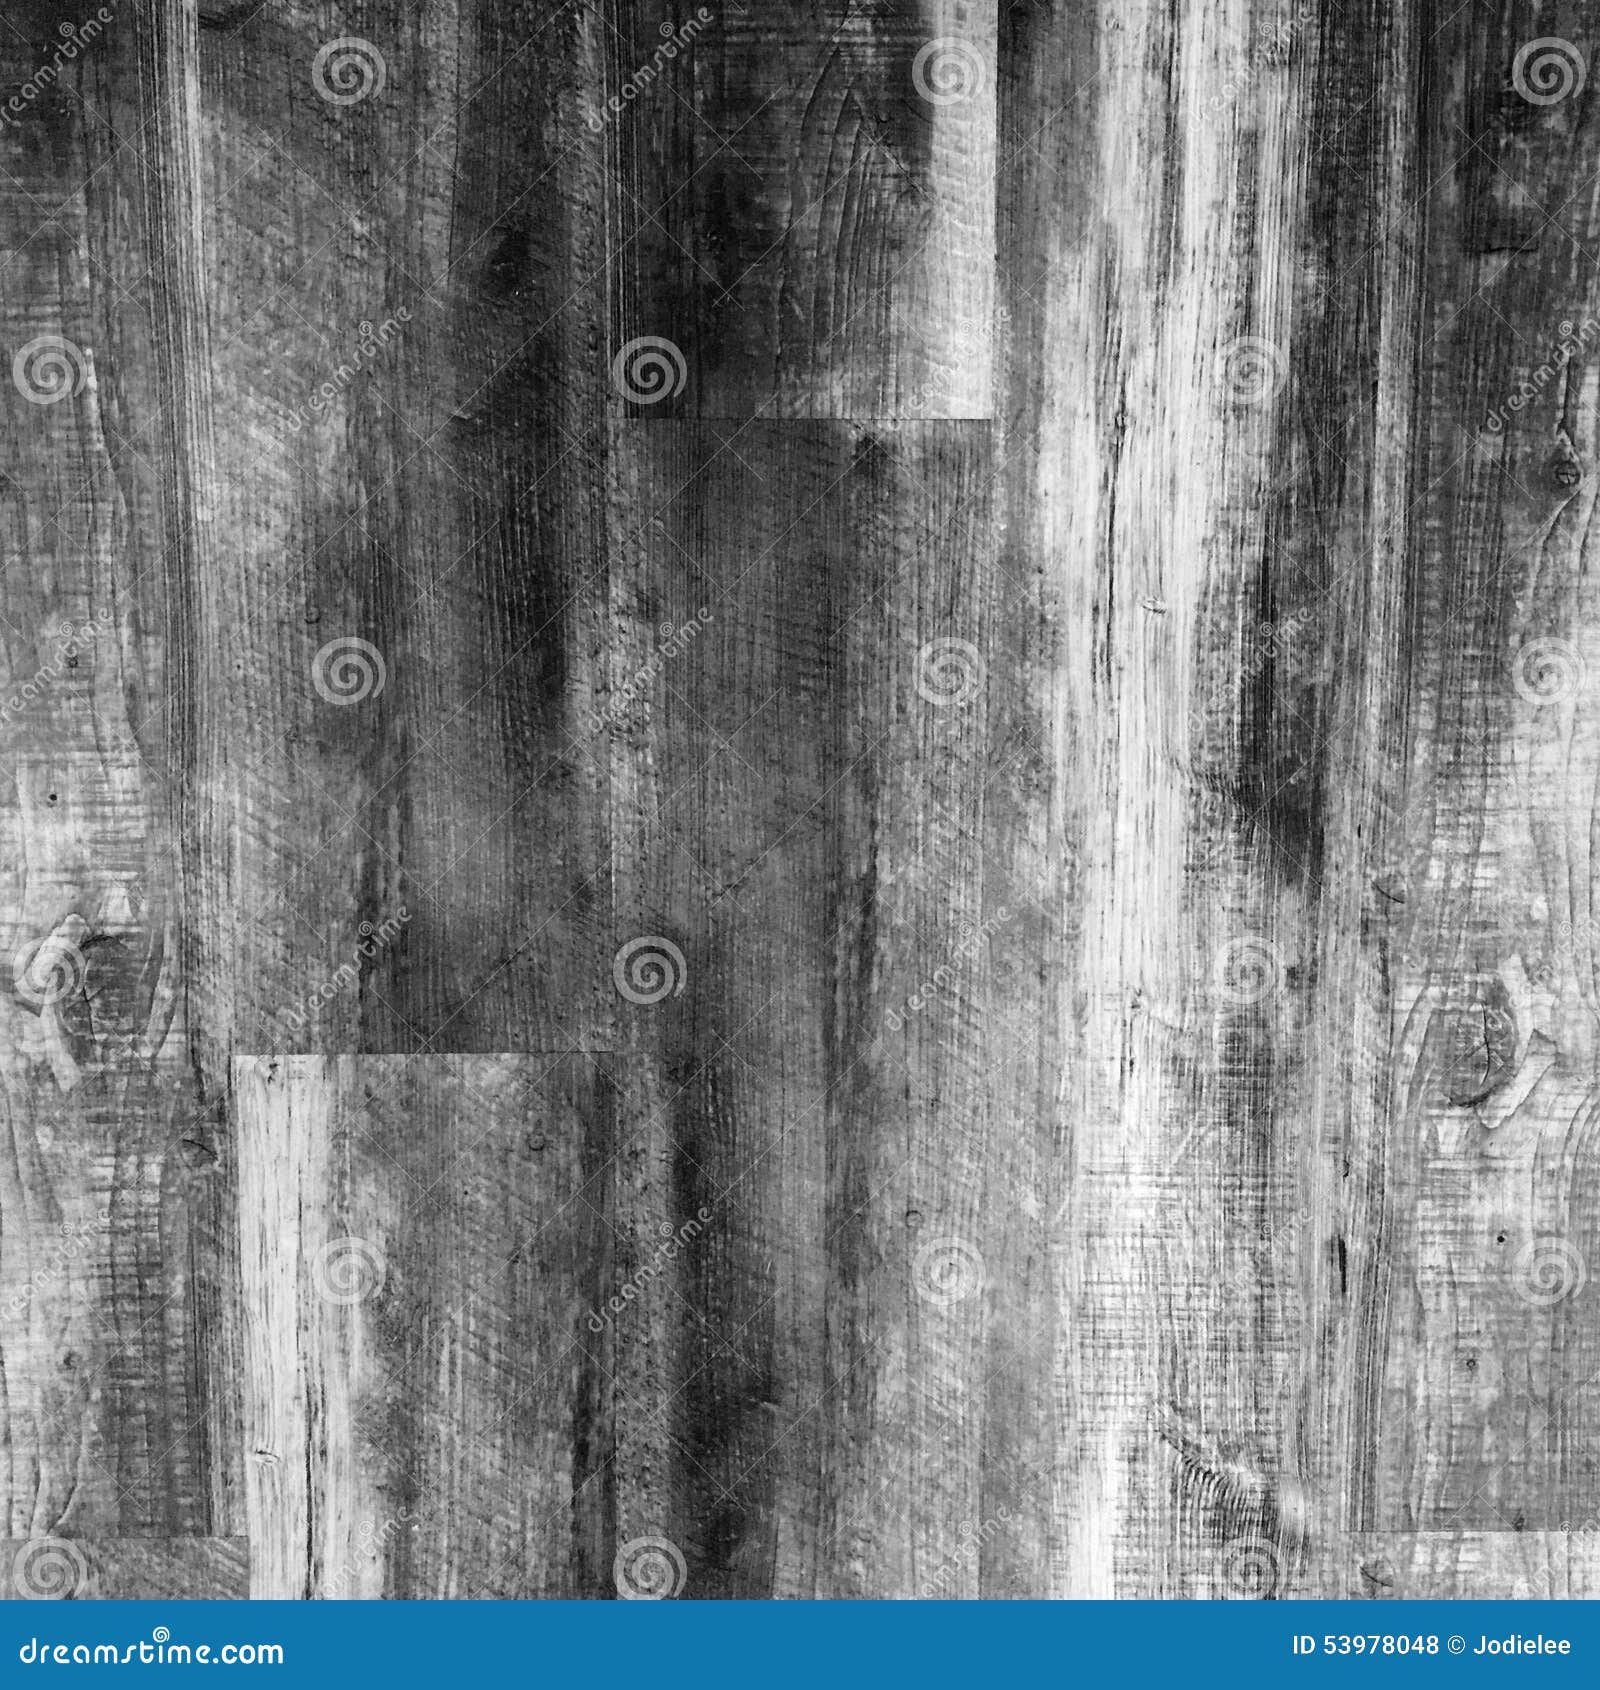 black and white grungy distressed wooden grain texture